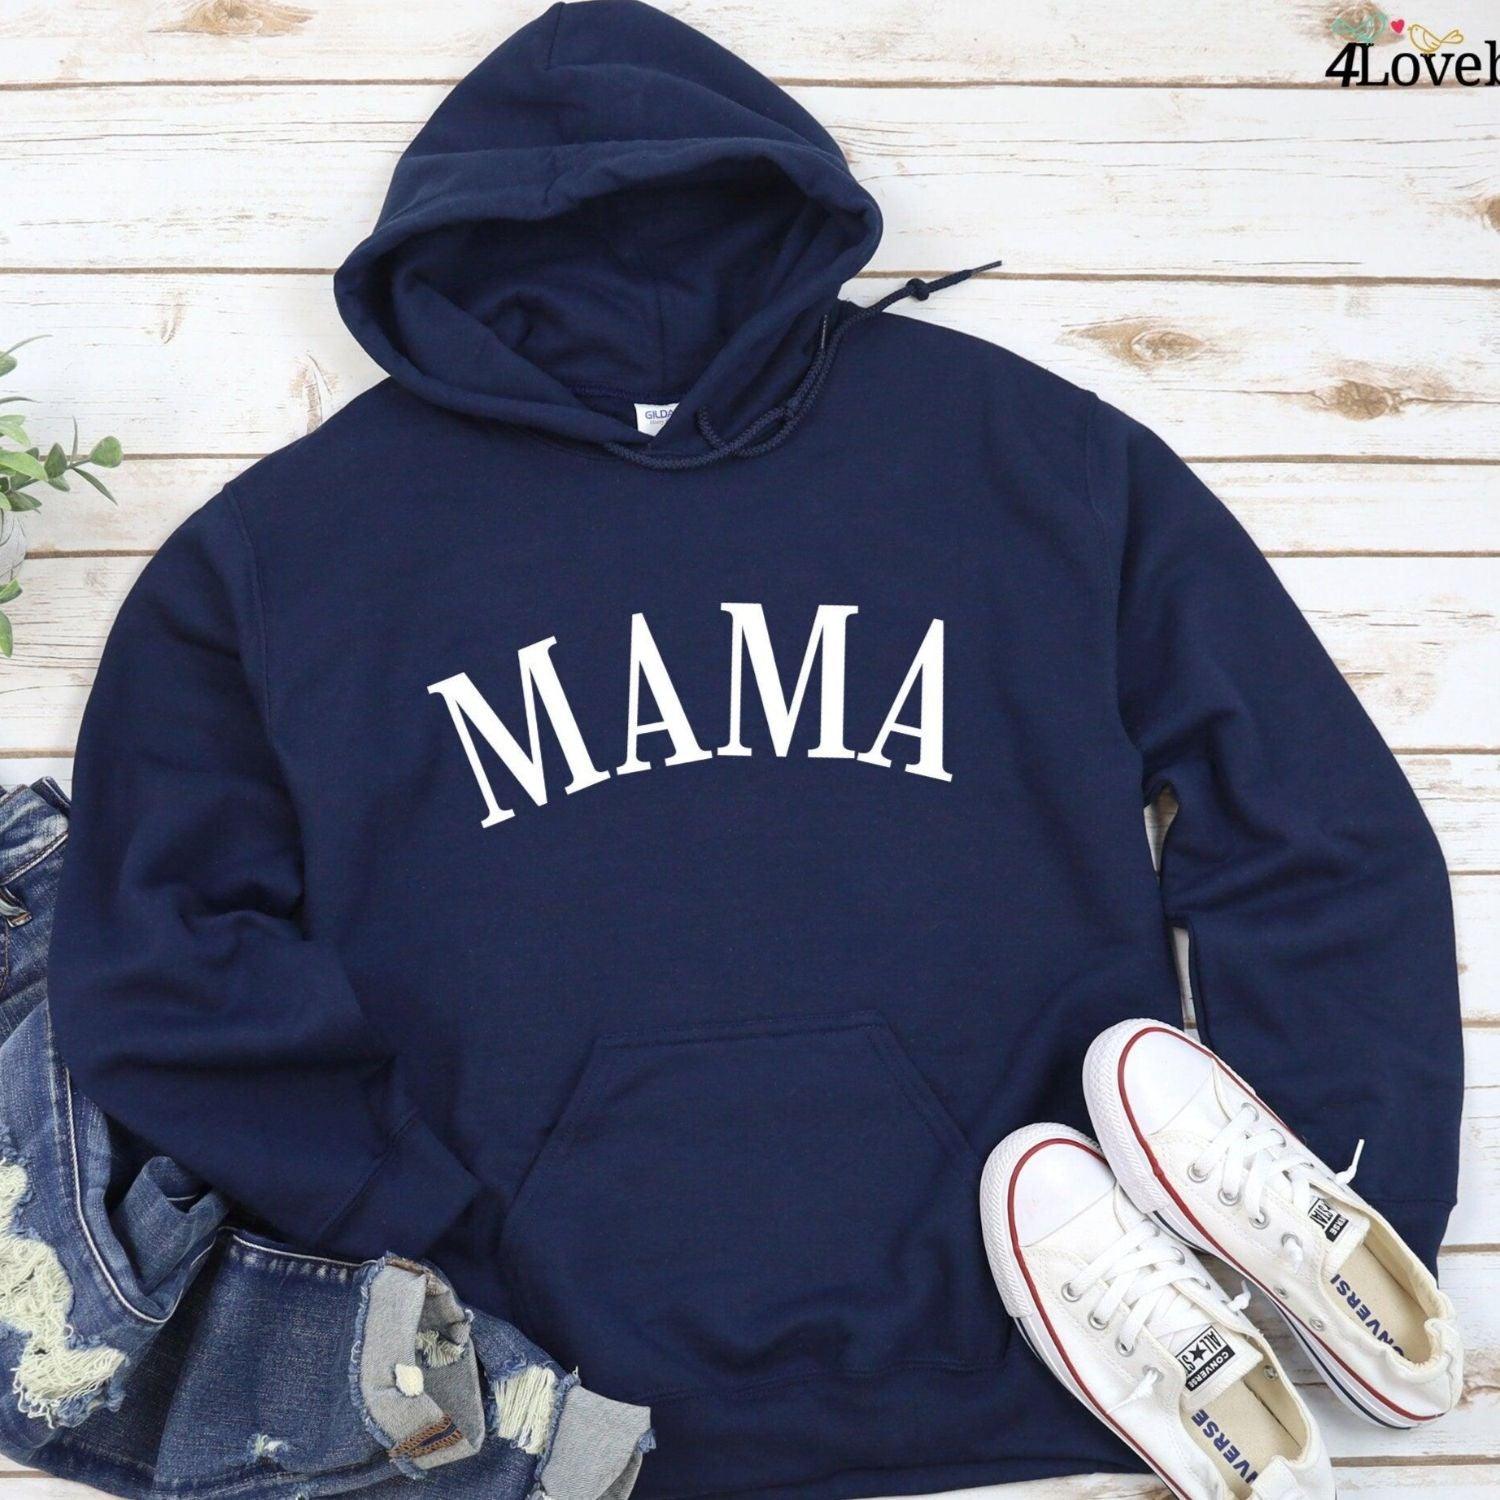 Matching Mama & Dada Set: Ideal Mother/Father's Day Outfits - Cozy & Stylish! - 4Lovebirds